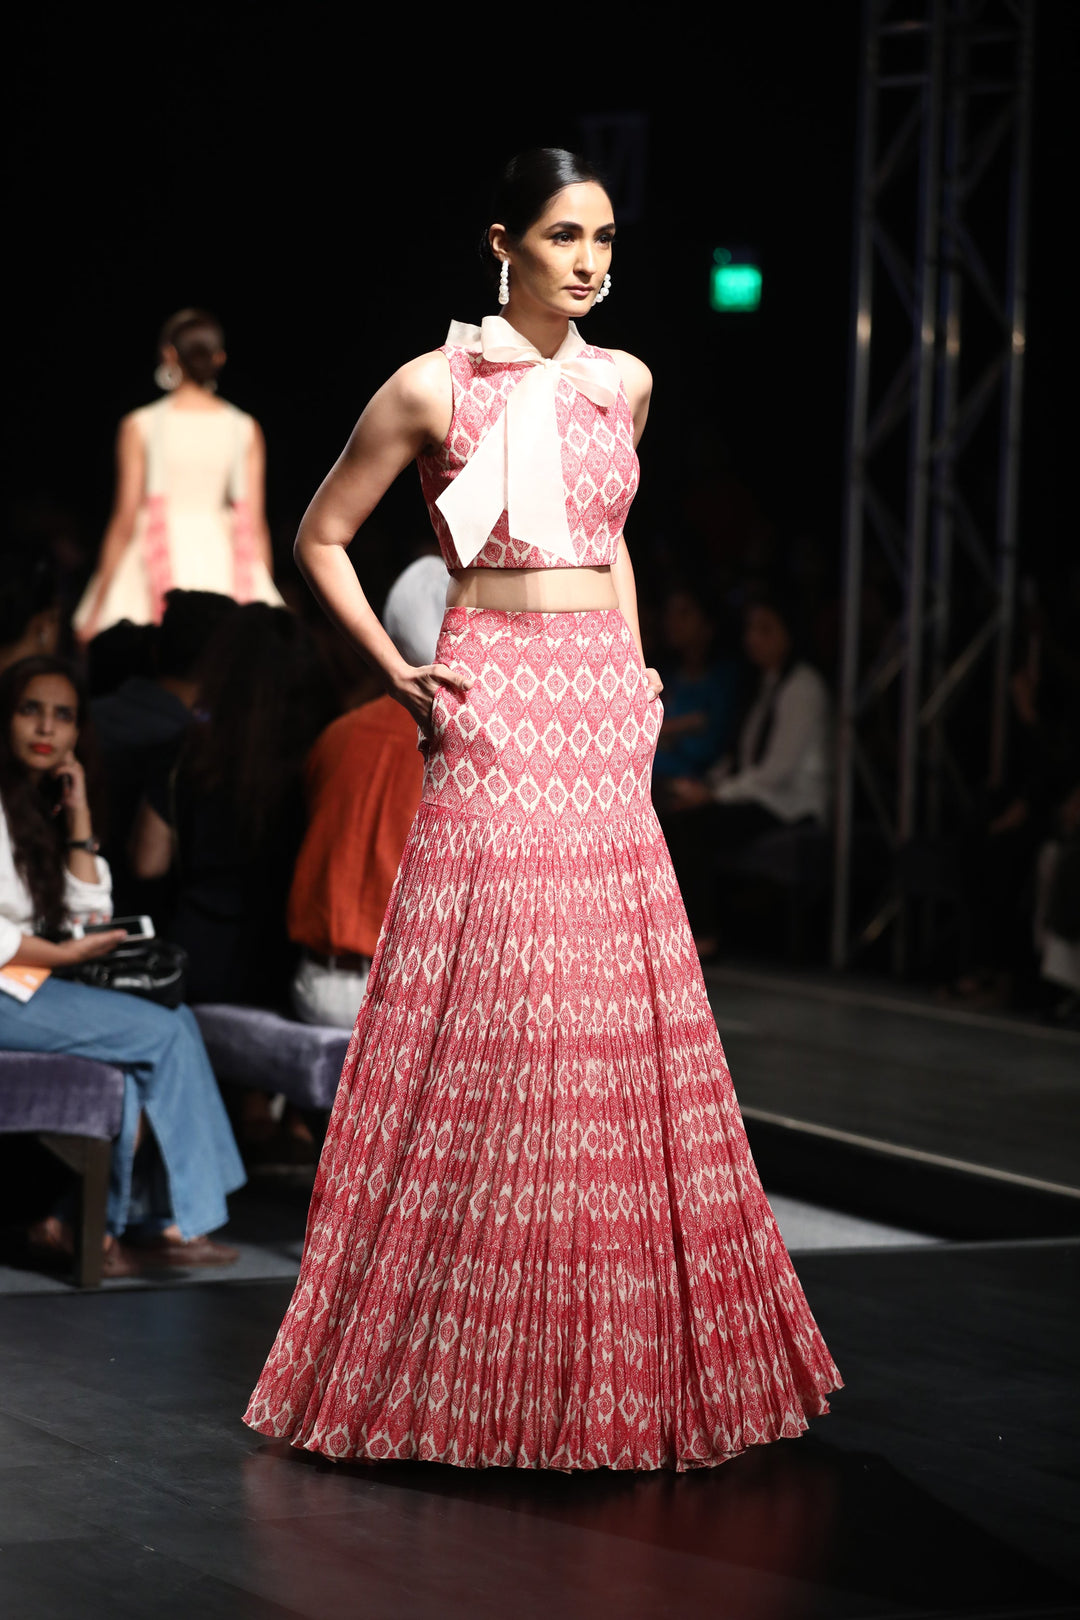 A Printed Crop Top With An Organza Bow Neck & A Printed Pleated Skirt - BHUMIKA SHARMA